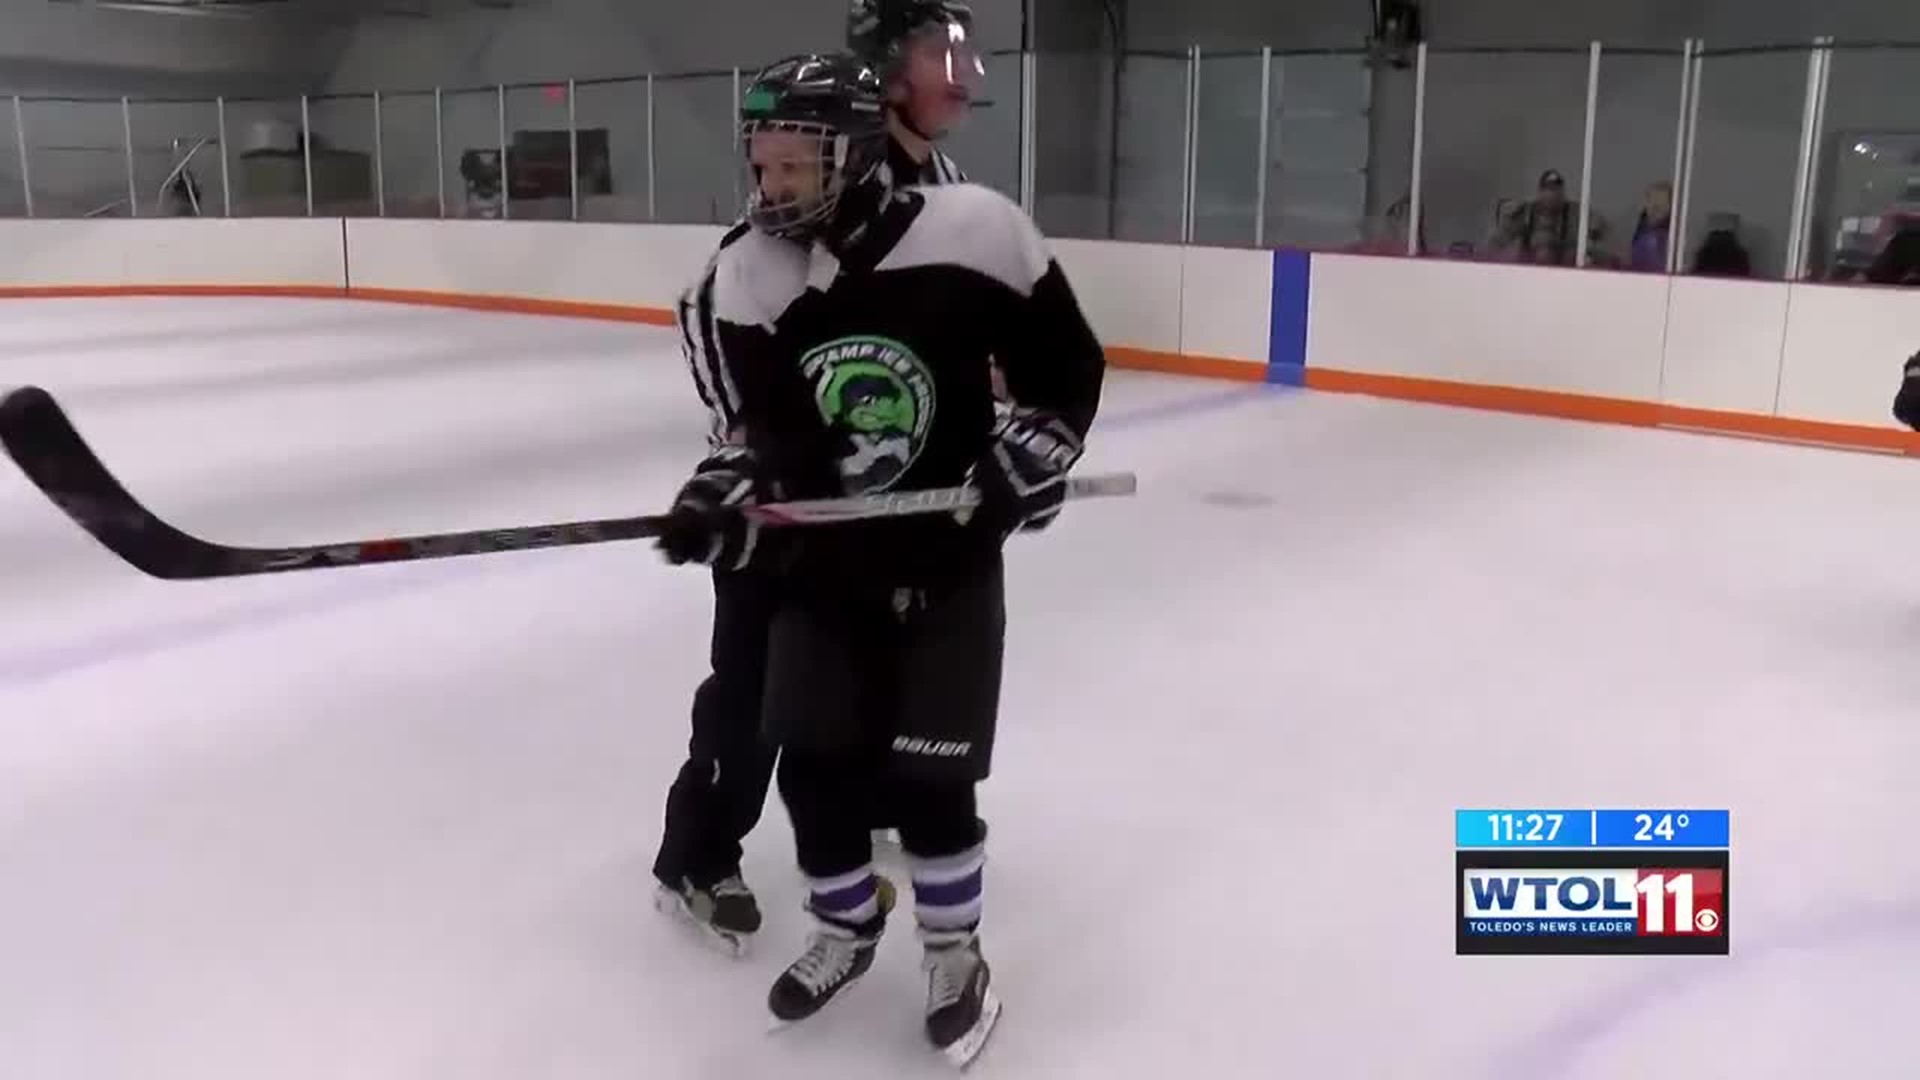 Local hockey team helps children with disabilities, families on and off the ice